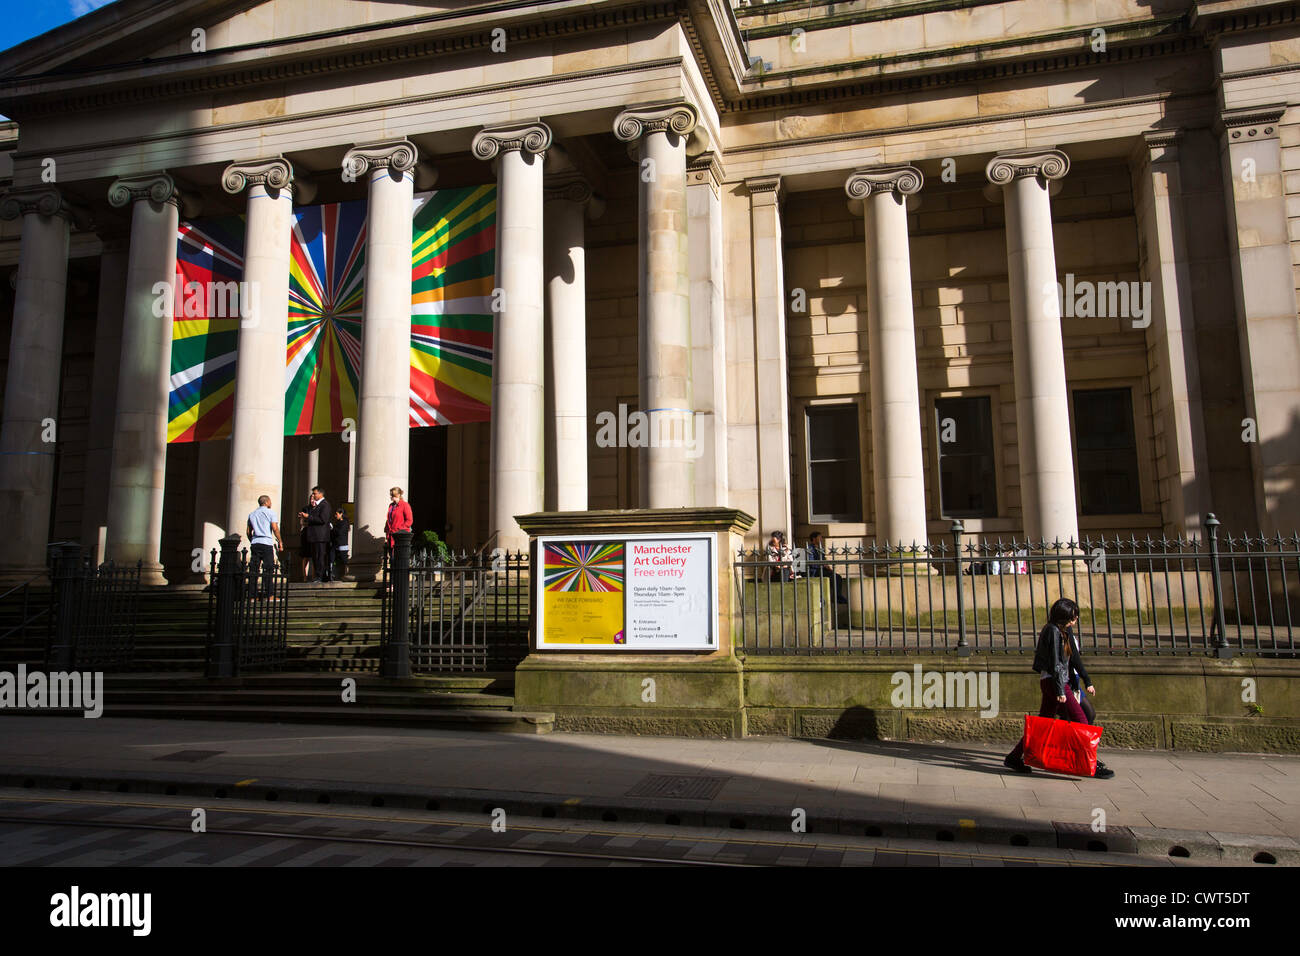 Manchester Art Gallery, UK. The exhibition being promoted is 'We Face Forward' featuring West African art. Stock Photo